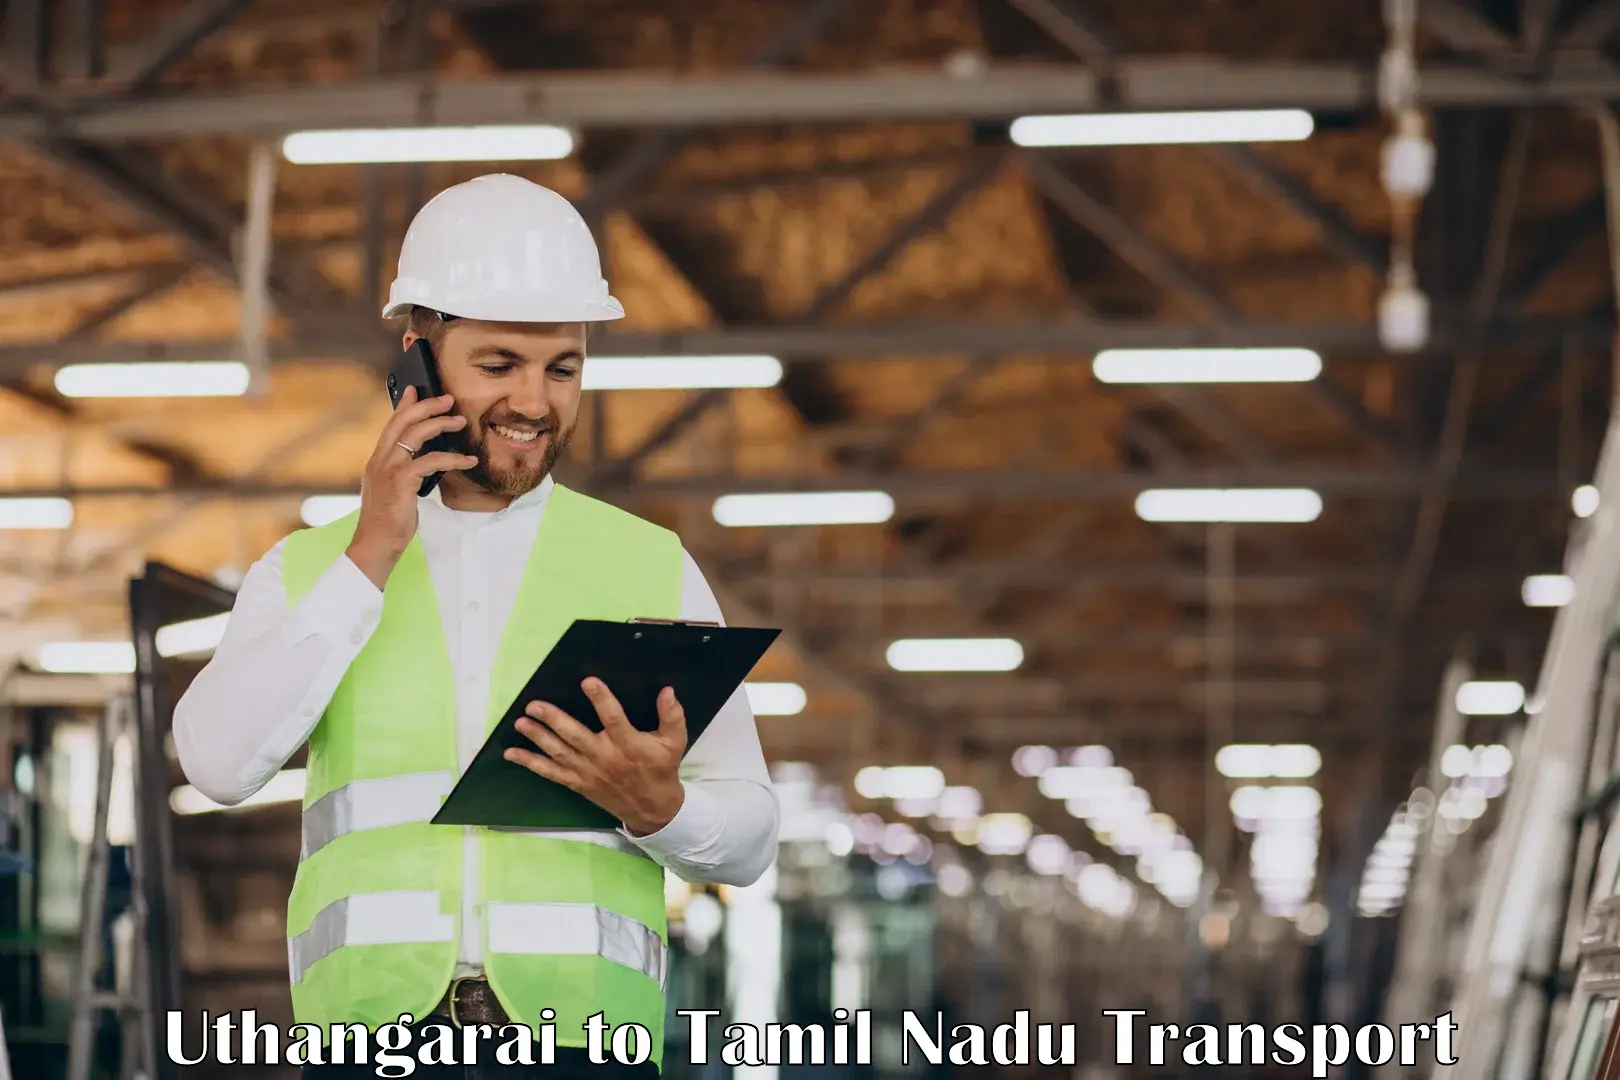 Road transport services in Uthangarai to Tamil Nadu